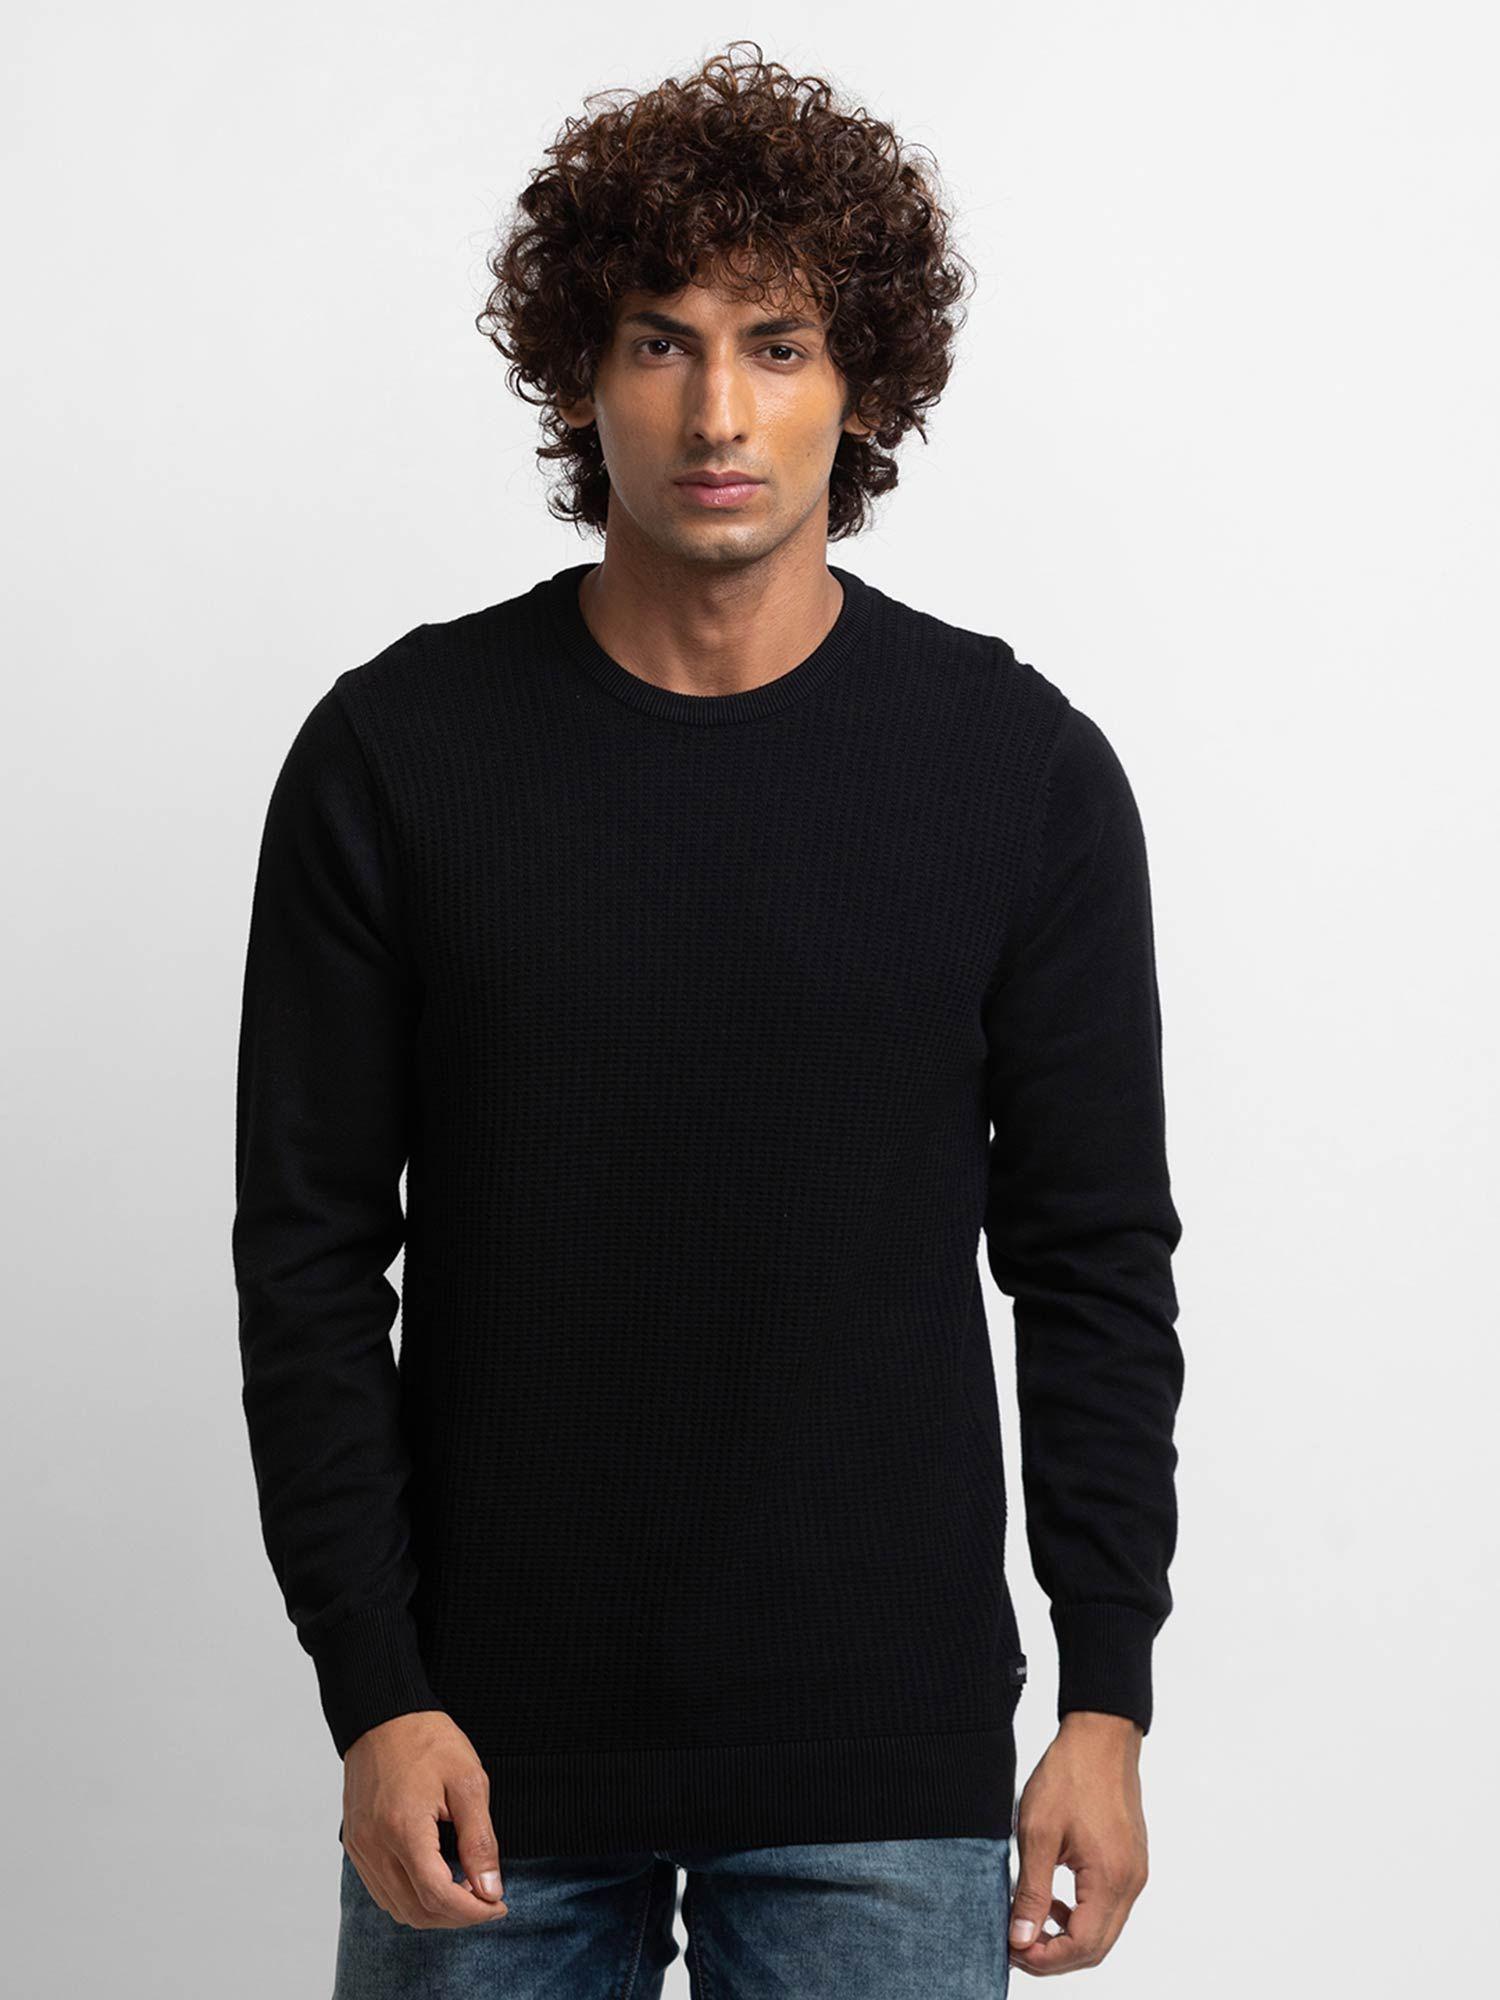 black-cotton-full-sleeve-casual-sweater-for-men